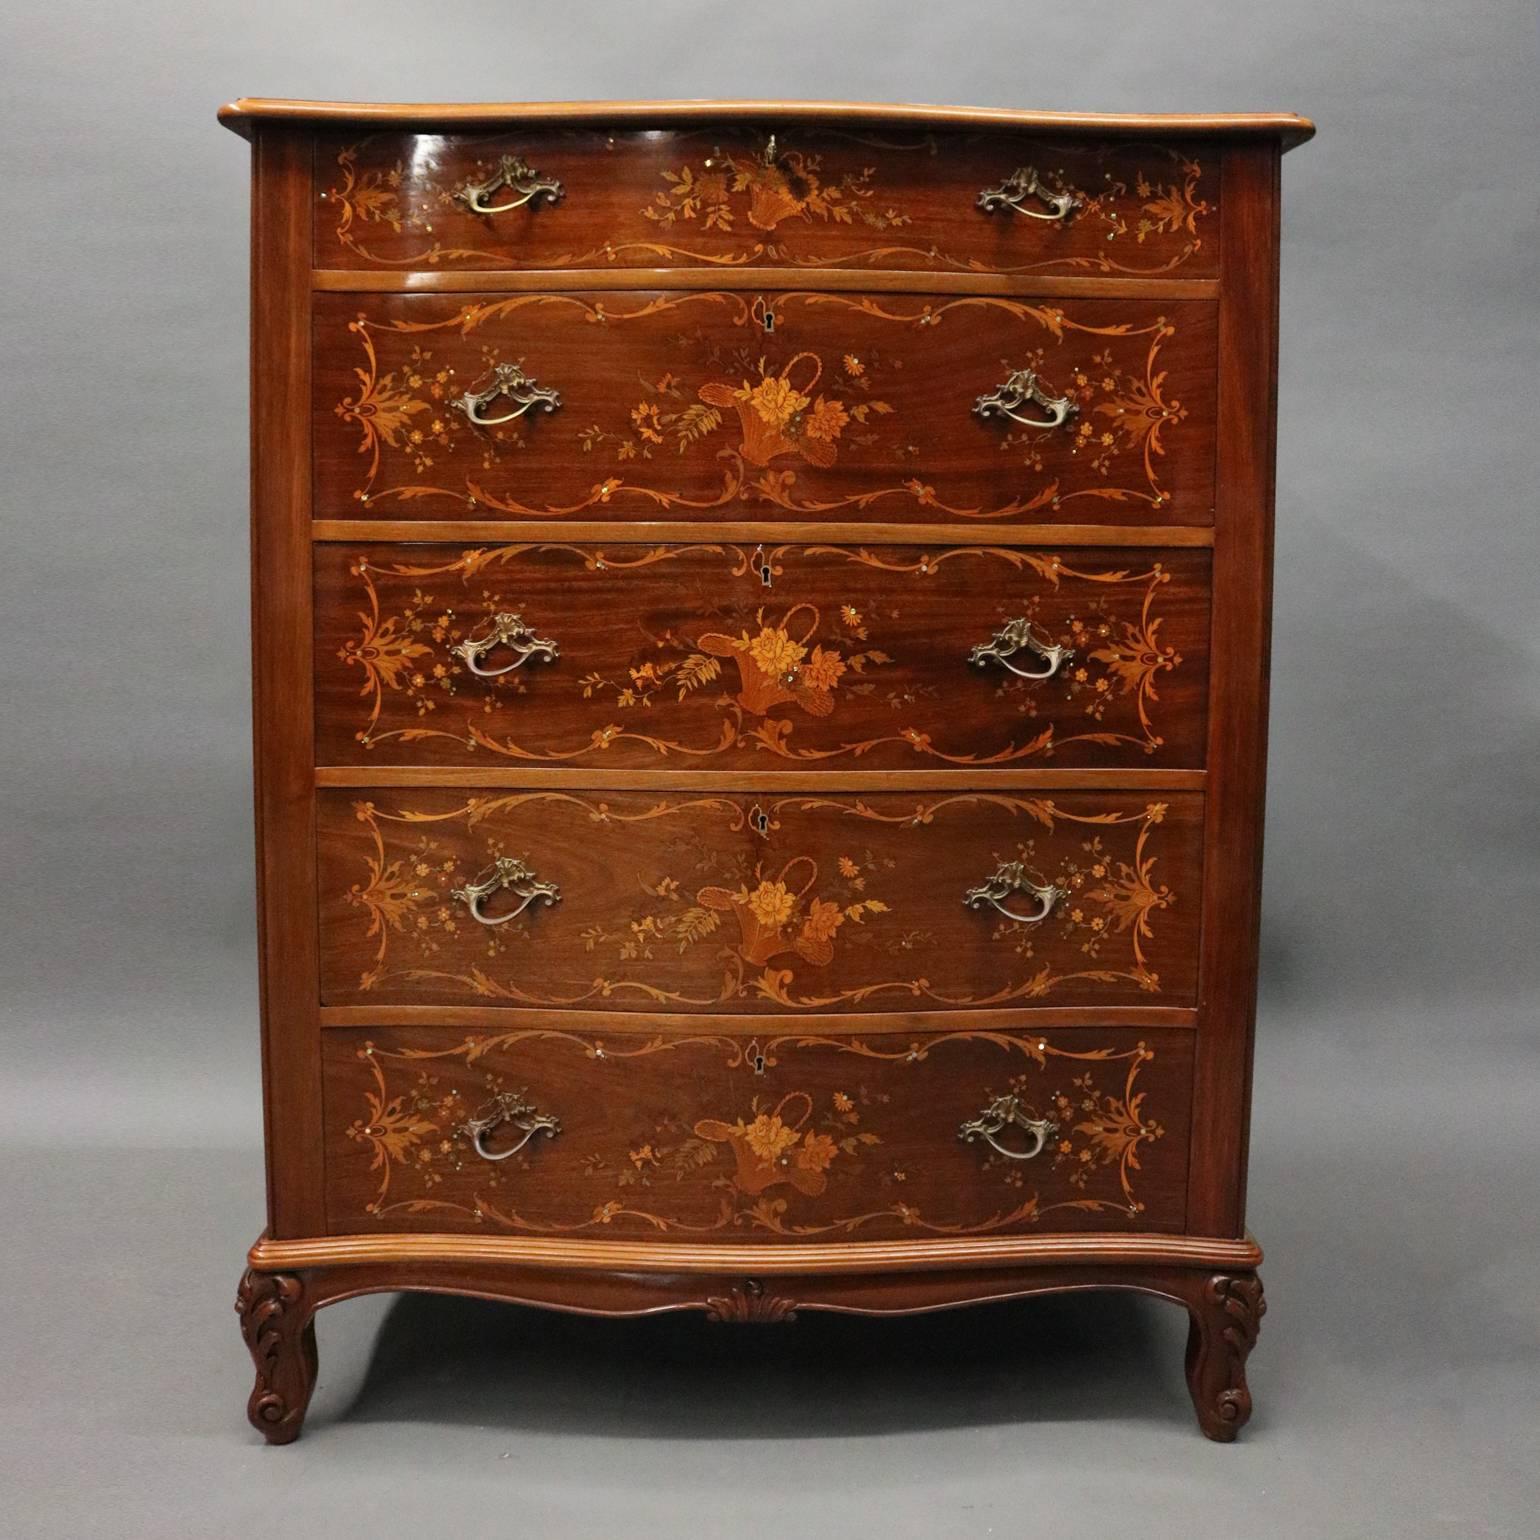 Antique R.J Horner & Co., New York, mahogany high chest features satinwood floral and foliate marquetry and banding with mother-of-pearl inlay with banded top, seated on carved acanthus and scroll cabriole legs, foliate gilt bronze pulls, circa